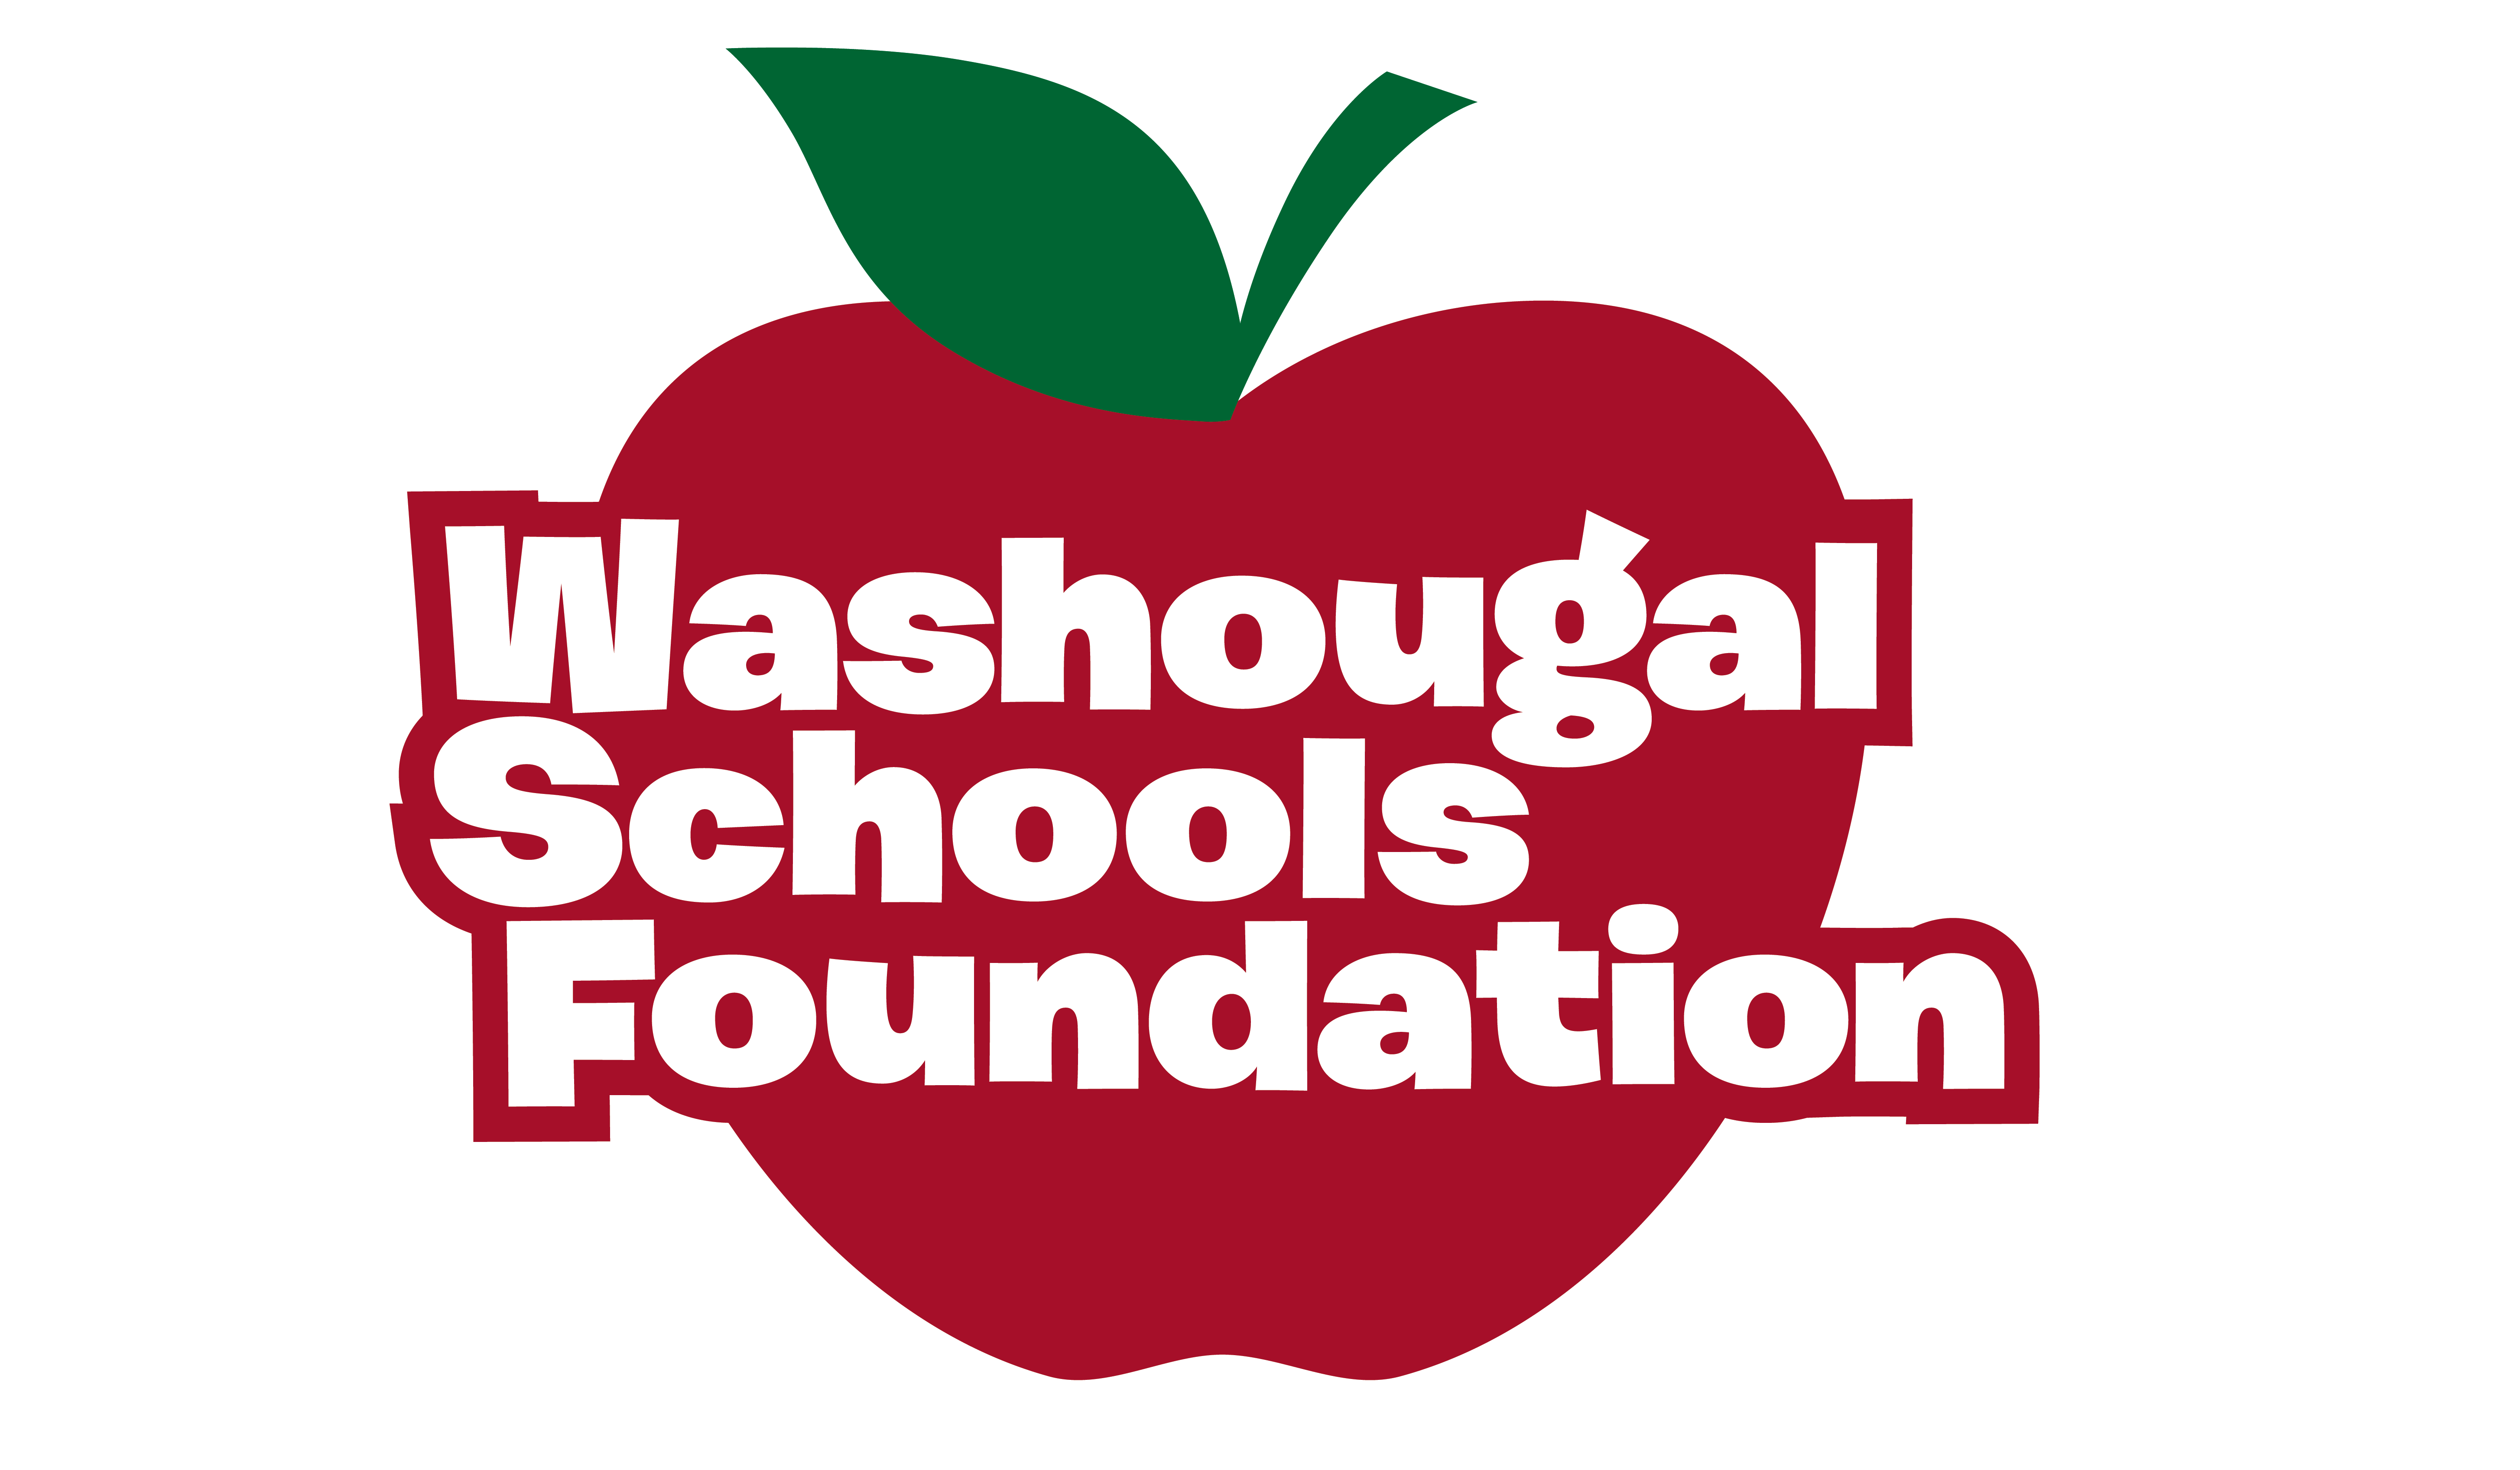 Washougal Schools Foundation on image of red apple with green leaf